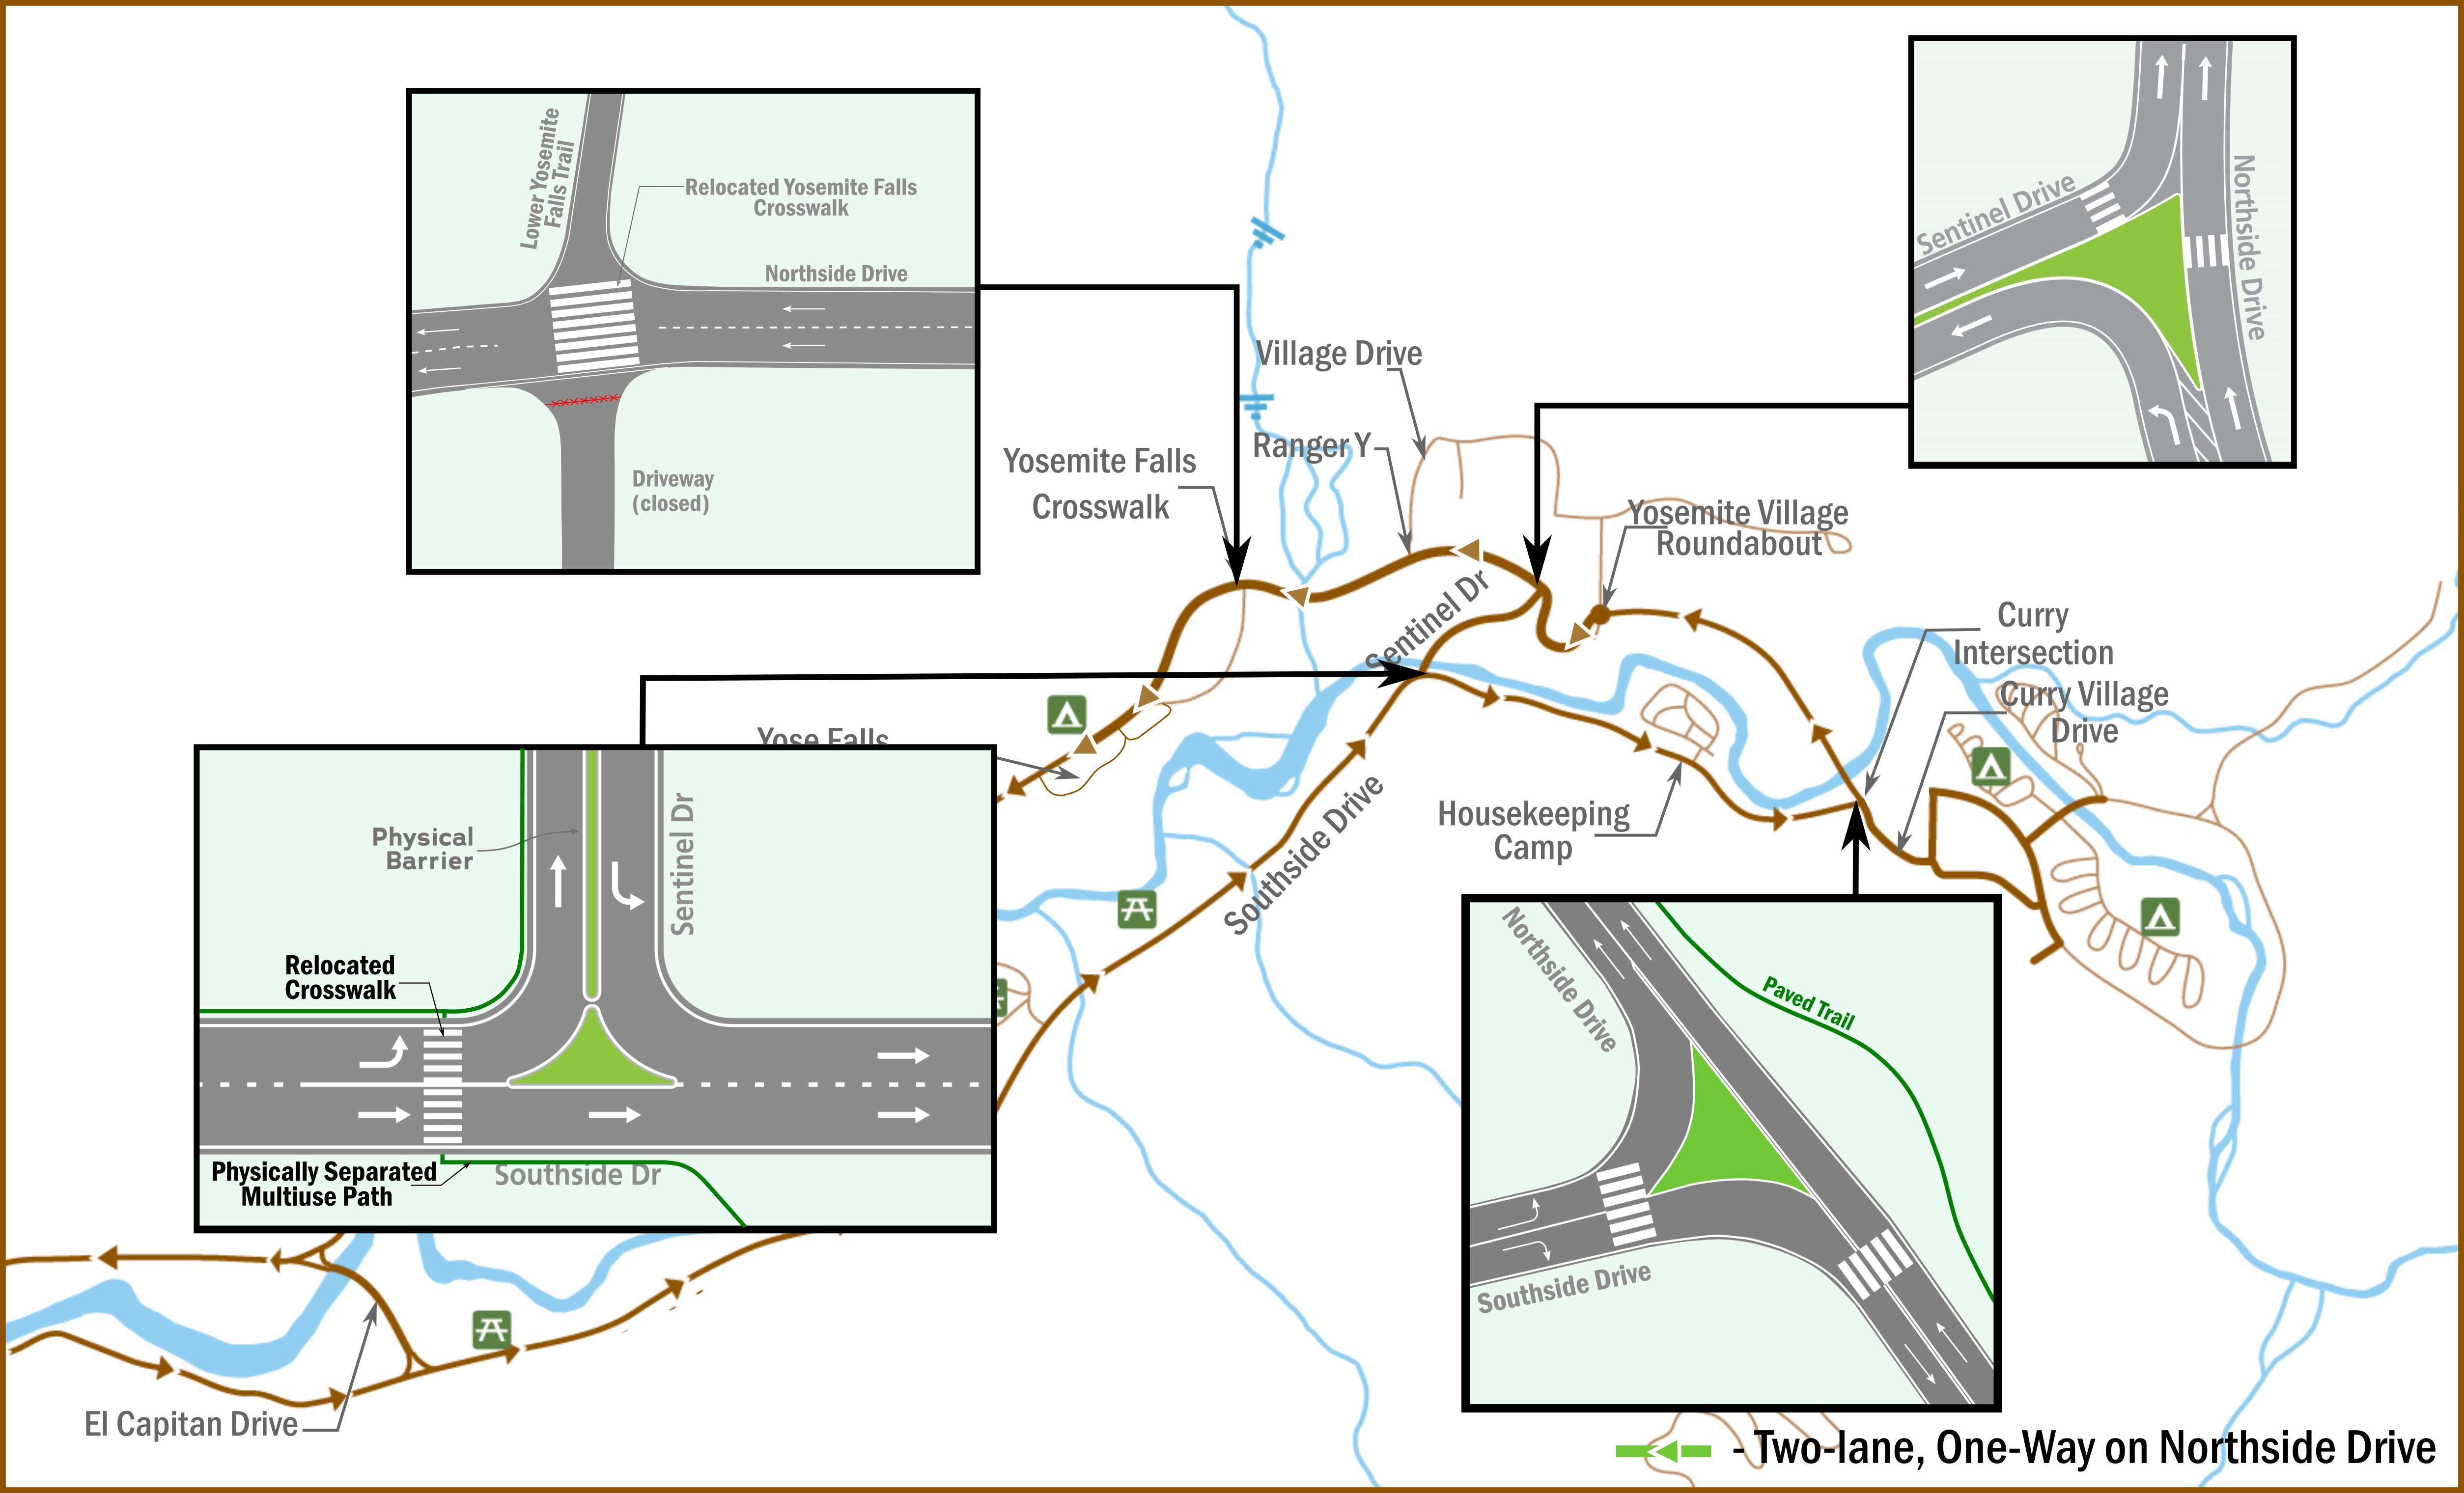 Map of roads in Yosemite Valley with special boxes around four intersections